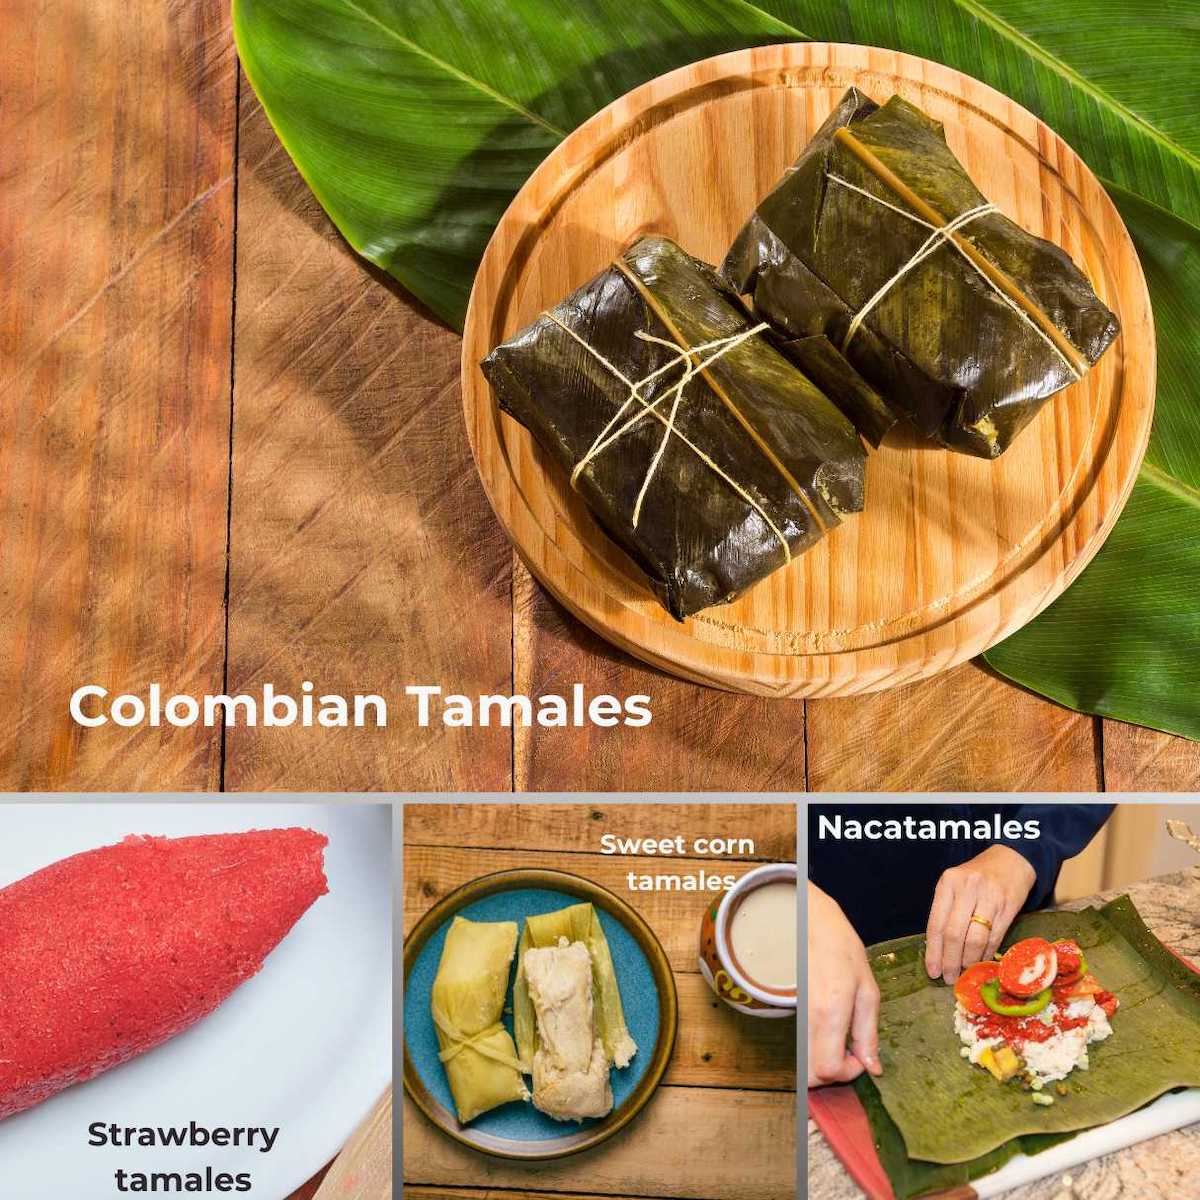 4 different types of tamales including colombian tamales, sweet tamales, and nacatamales